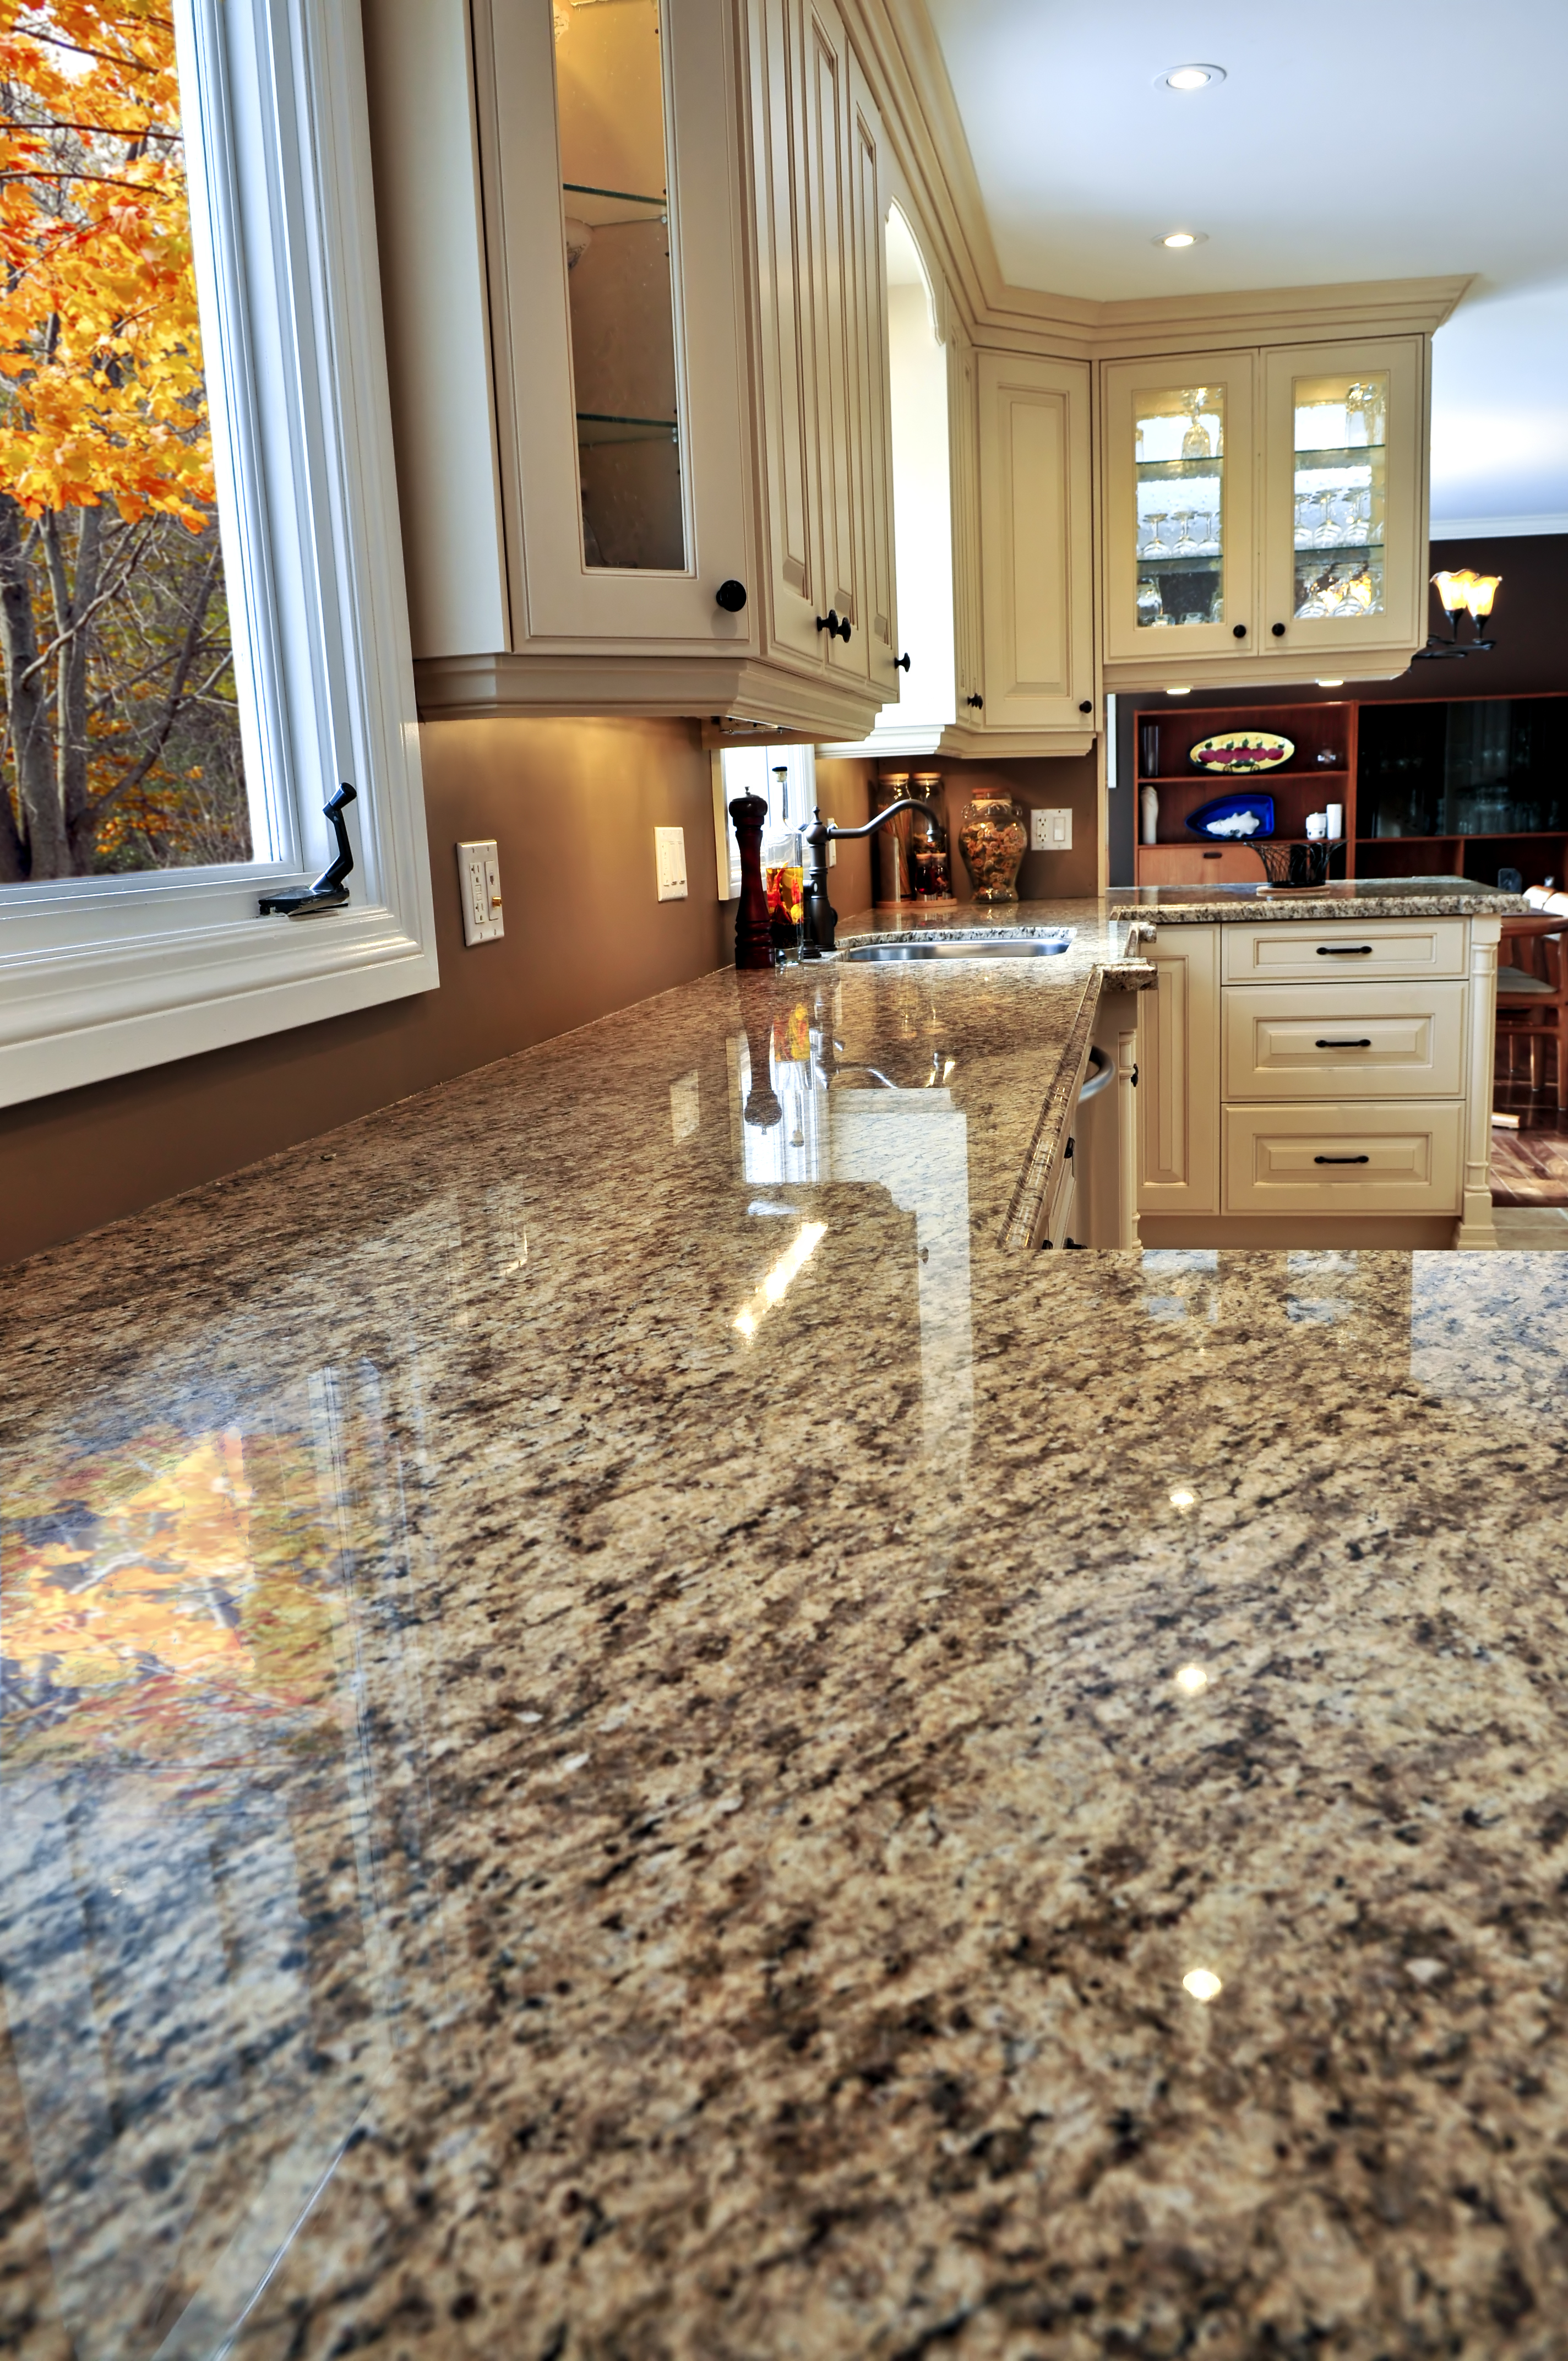 7 Common Kitchen Countertop Problems, My Granite Countertop Is Not Smooth